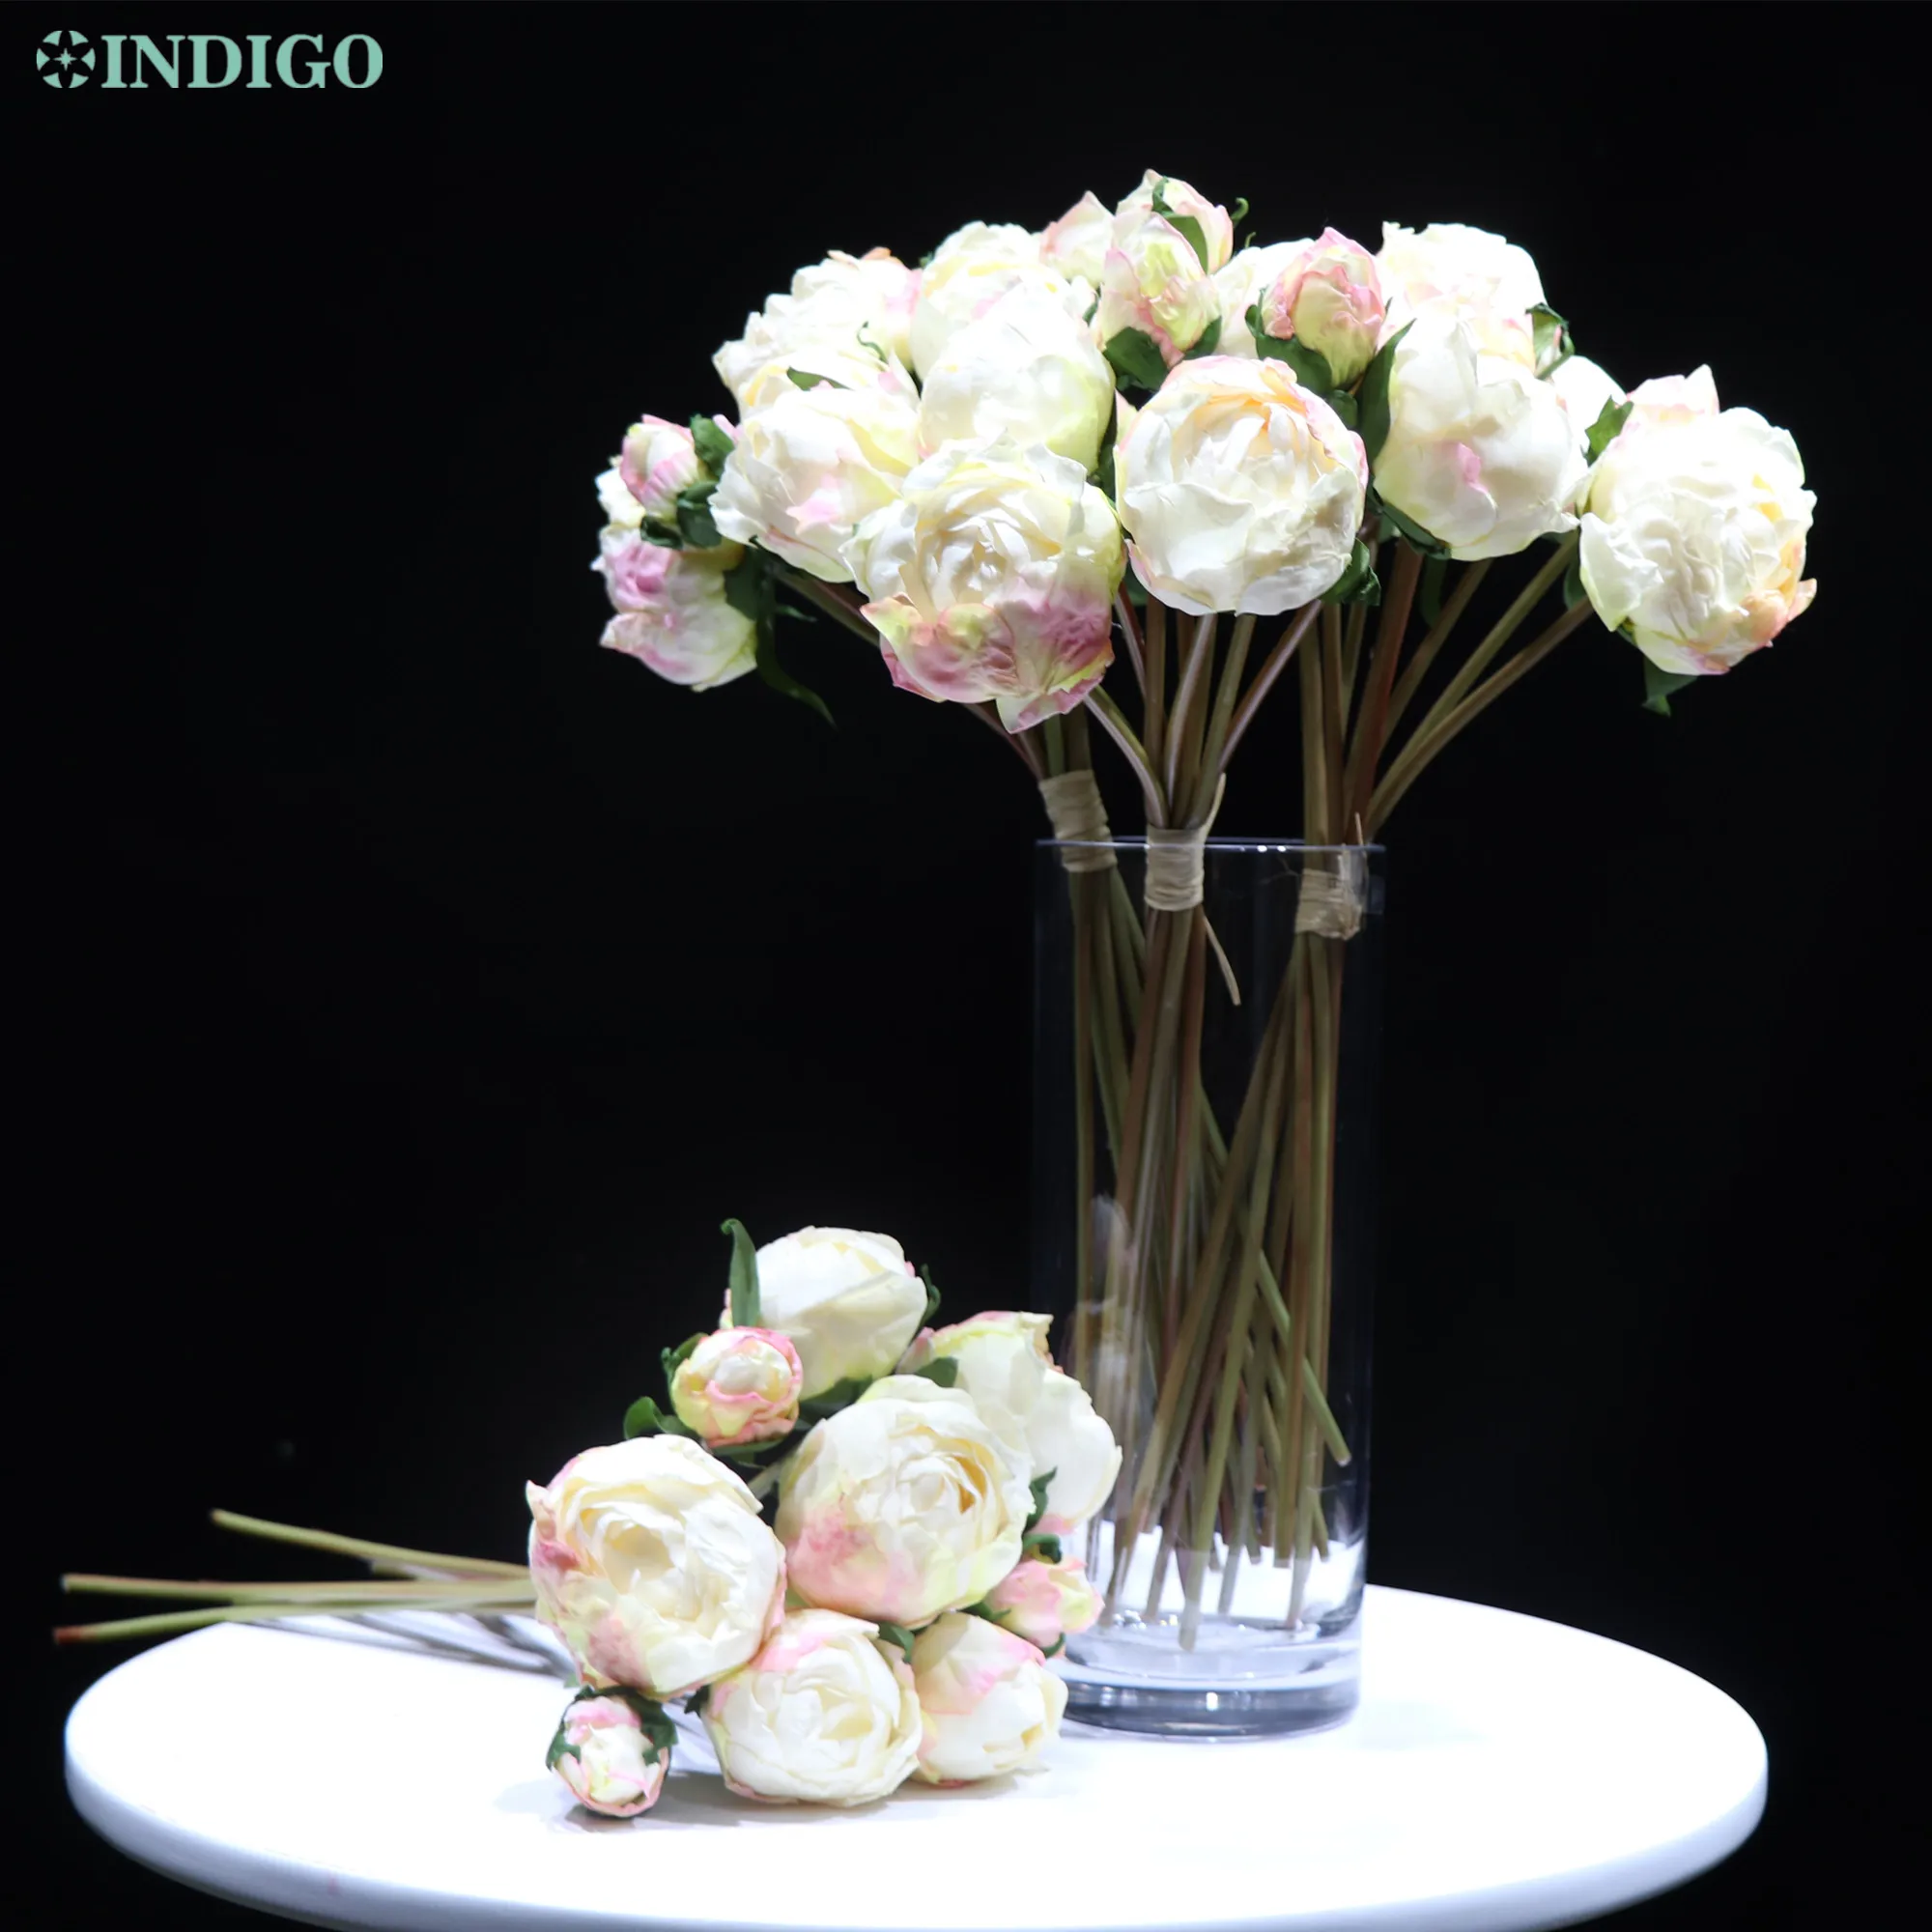 

9 Pcs/Bunch Peony Bouquet Champagne Rose Artificial Flower Wedding Party Event Home Table Decoration Gift - INDIGO